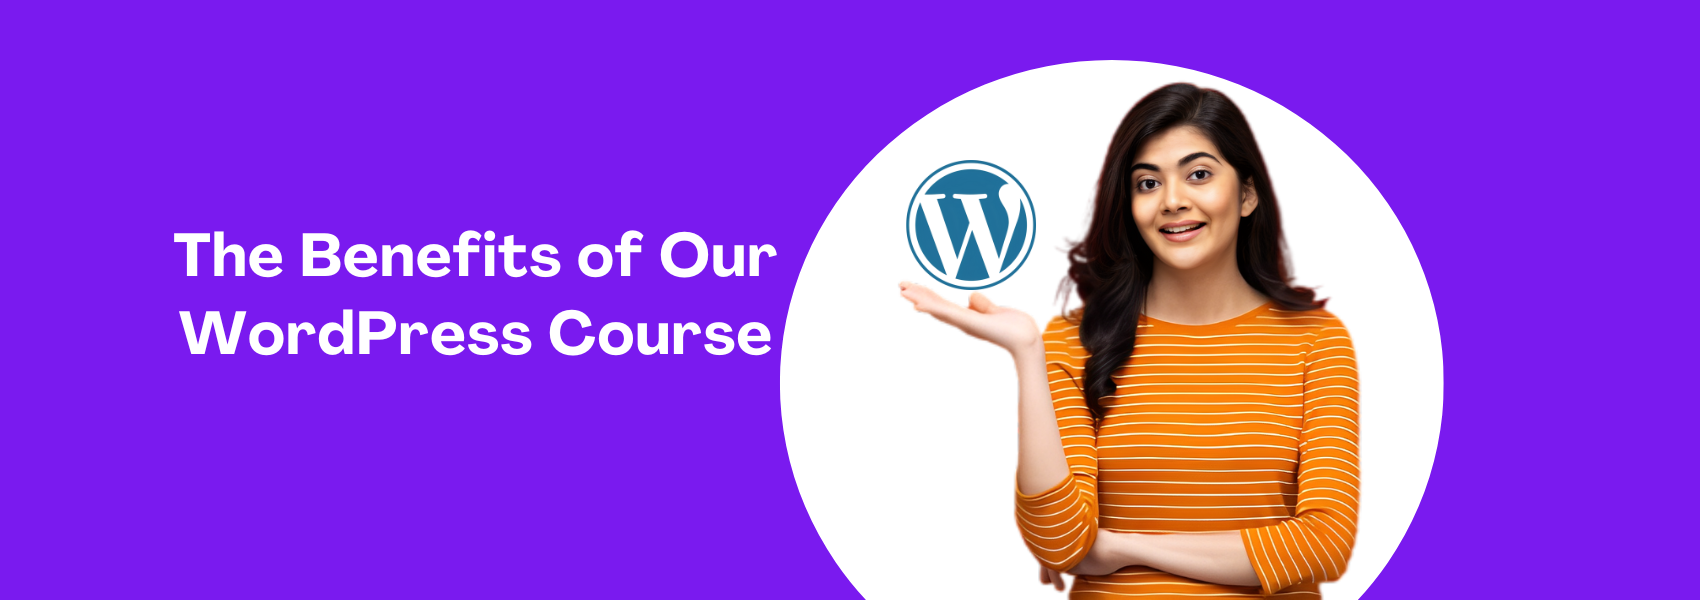 The Benefits of Our WordPress Course